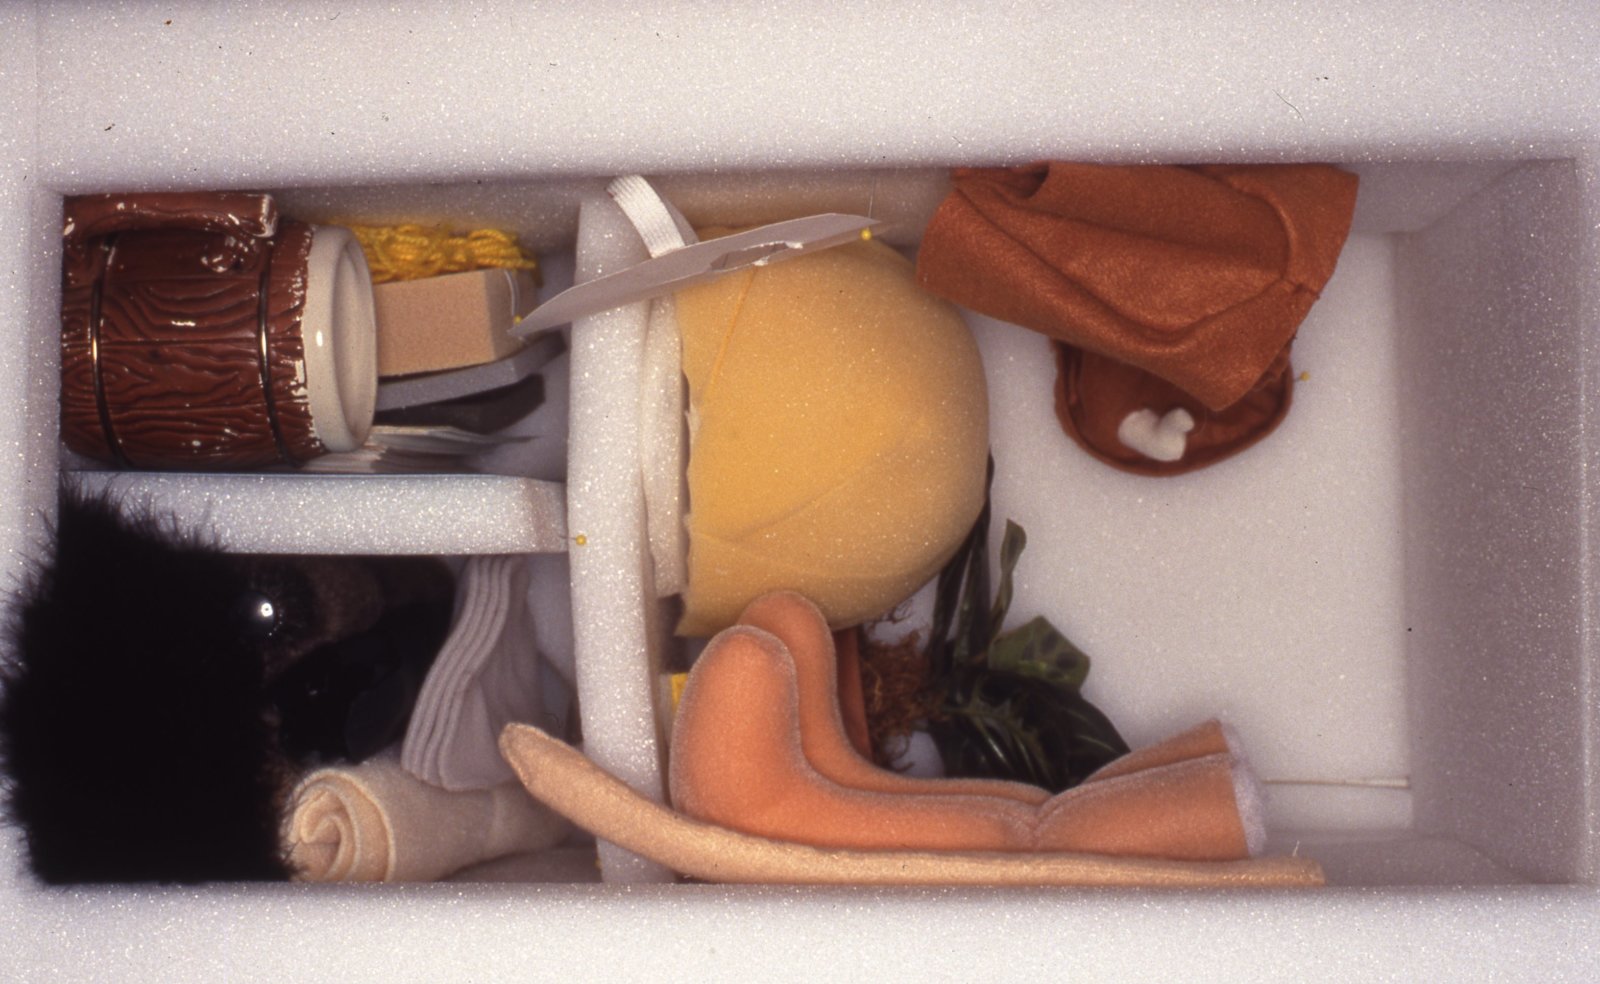 Geoffrey Farmer, Puppet Kit (Personality Workshop) (detail), 2001, crate, various media and video, dimensions variable